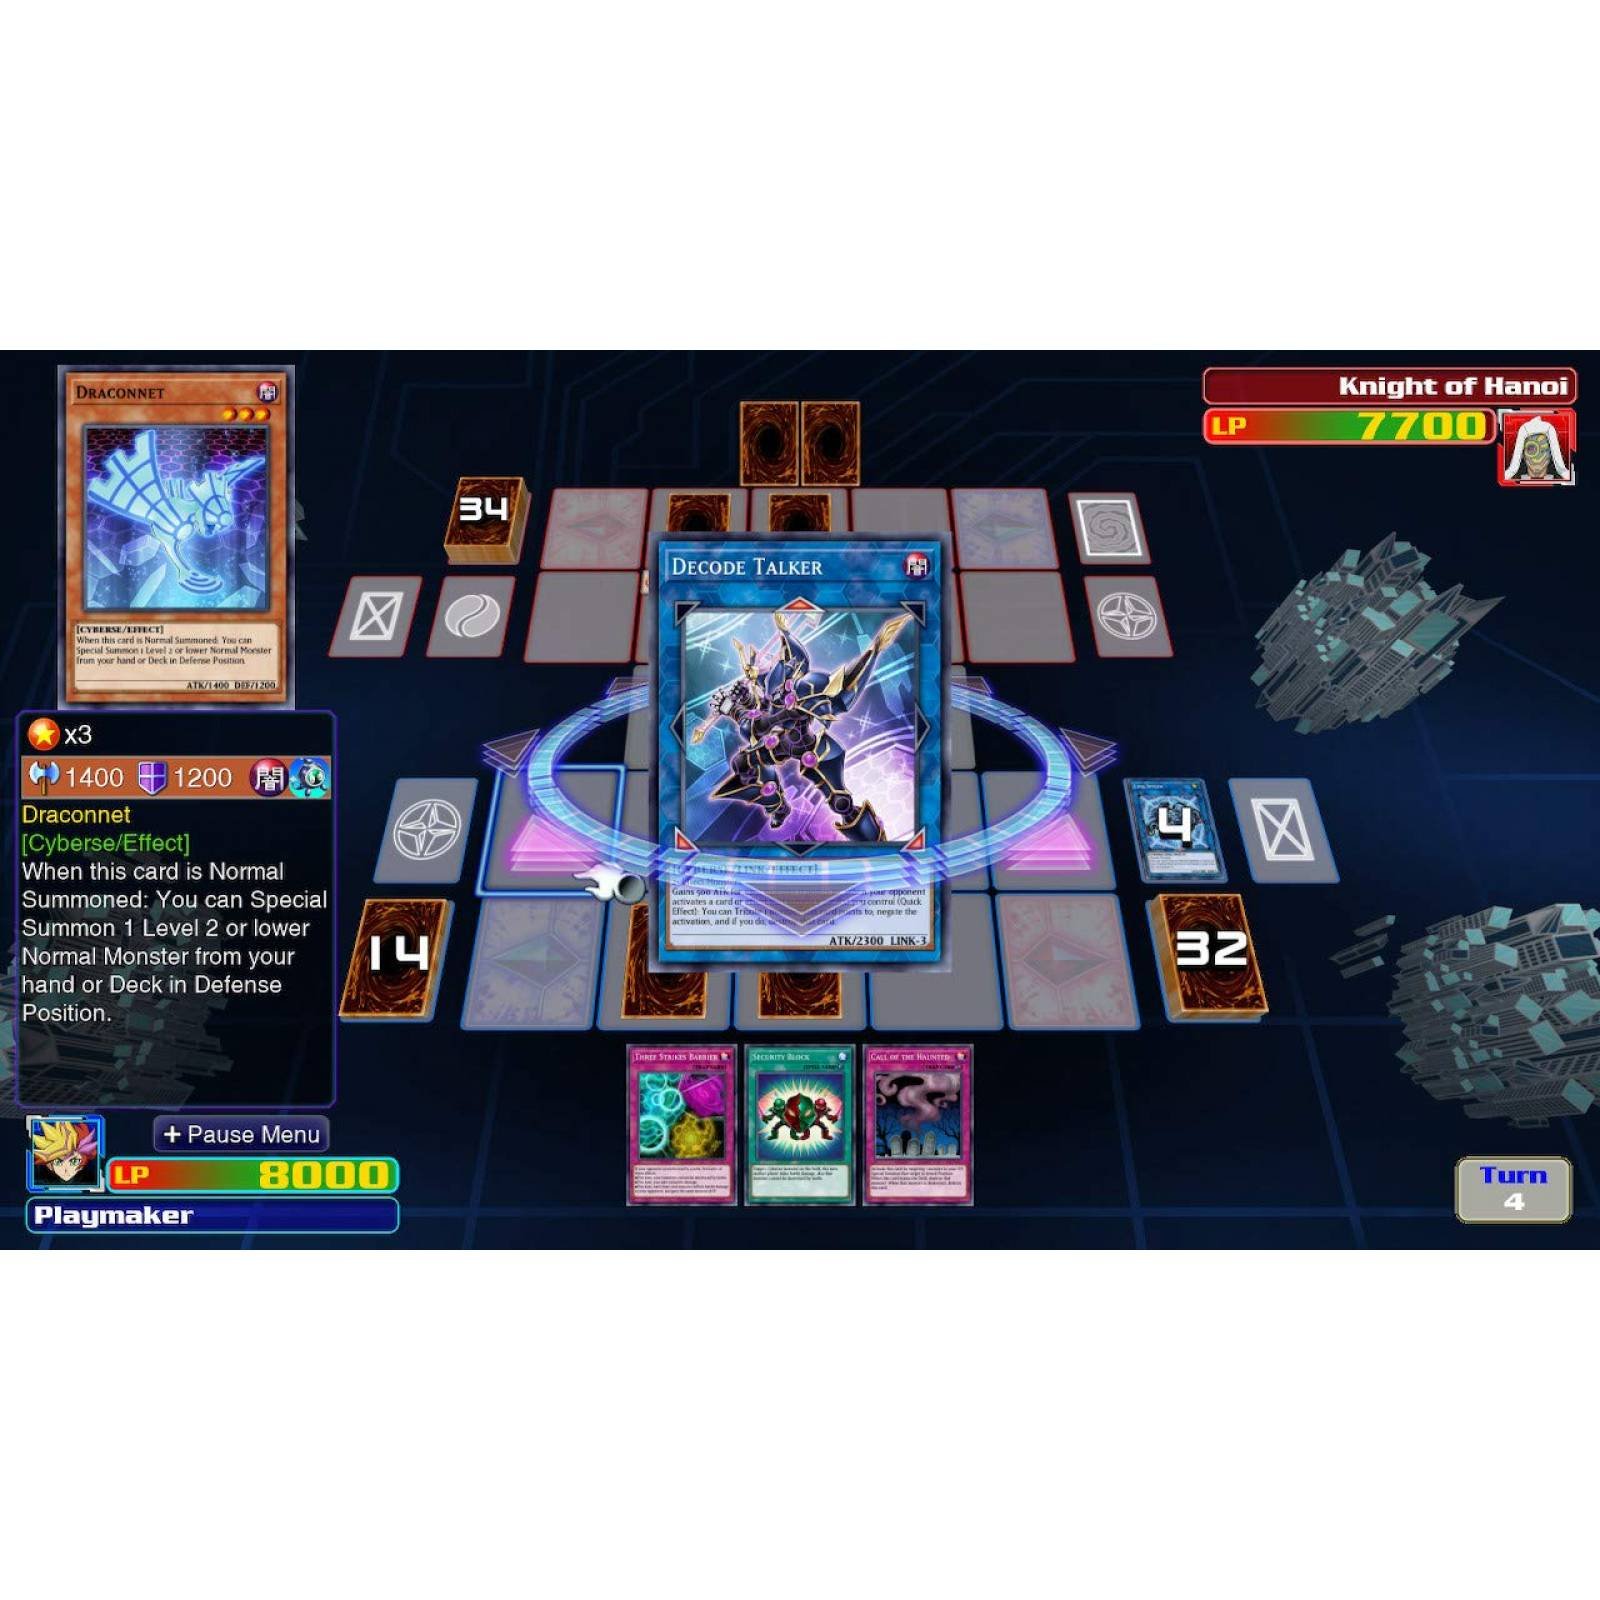 Switch Yu-Gi-Oh! Legacy of The Duelist: Link Evolution